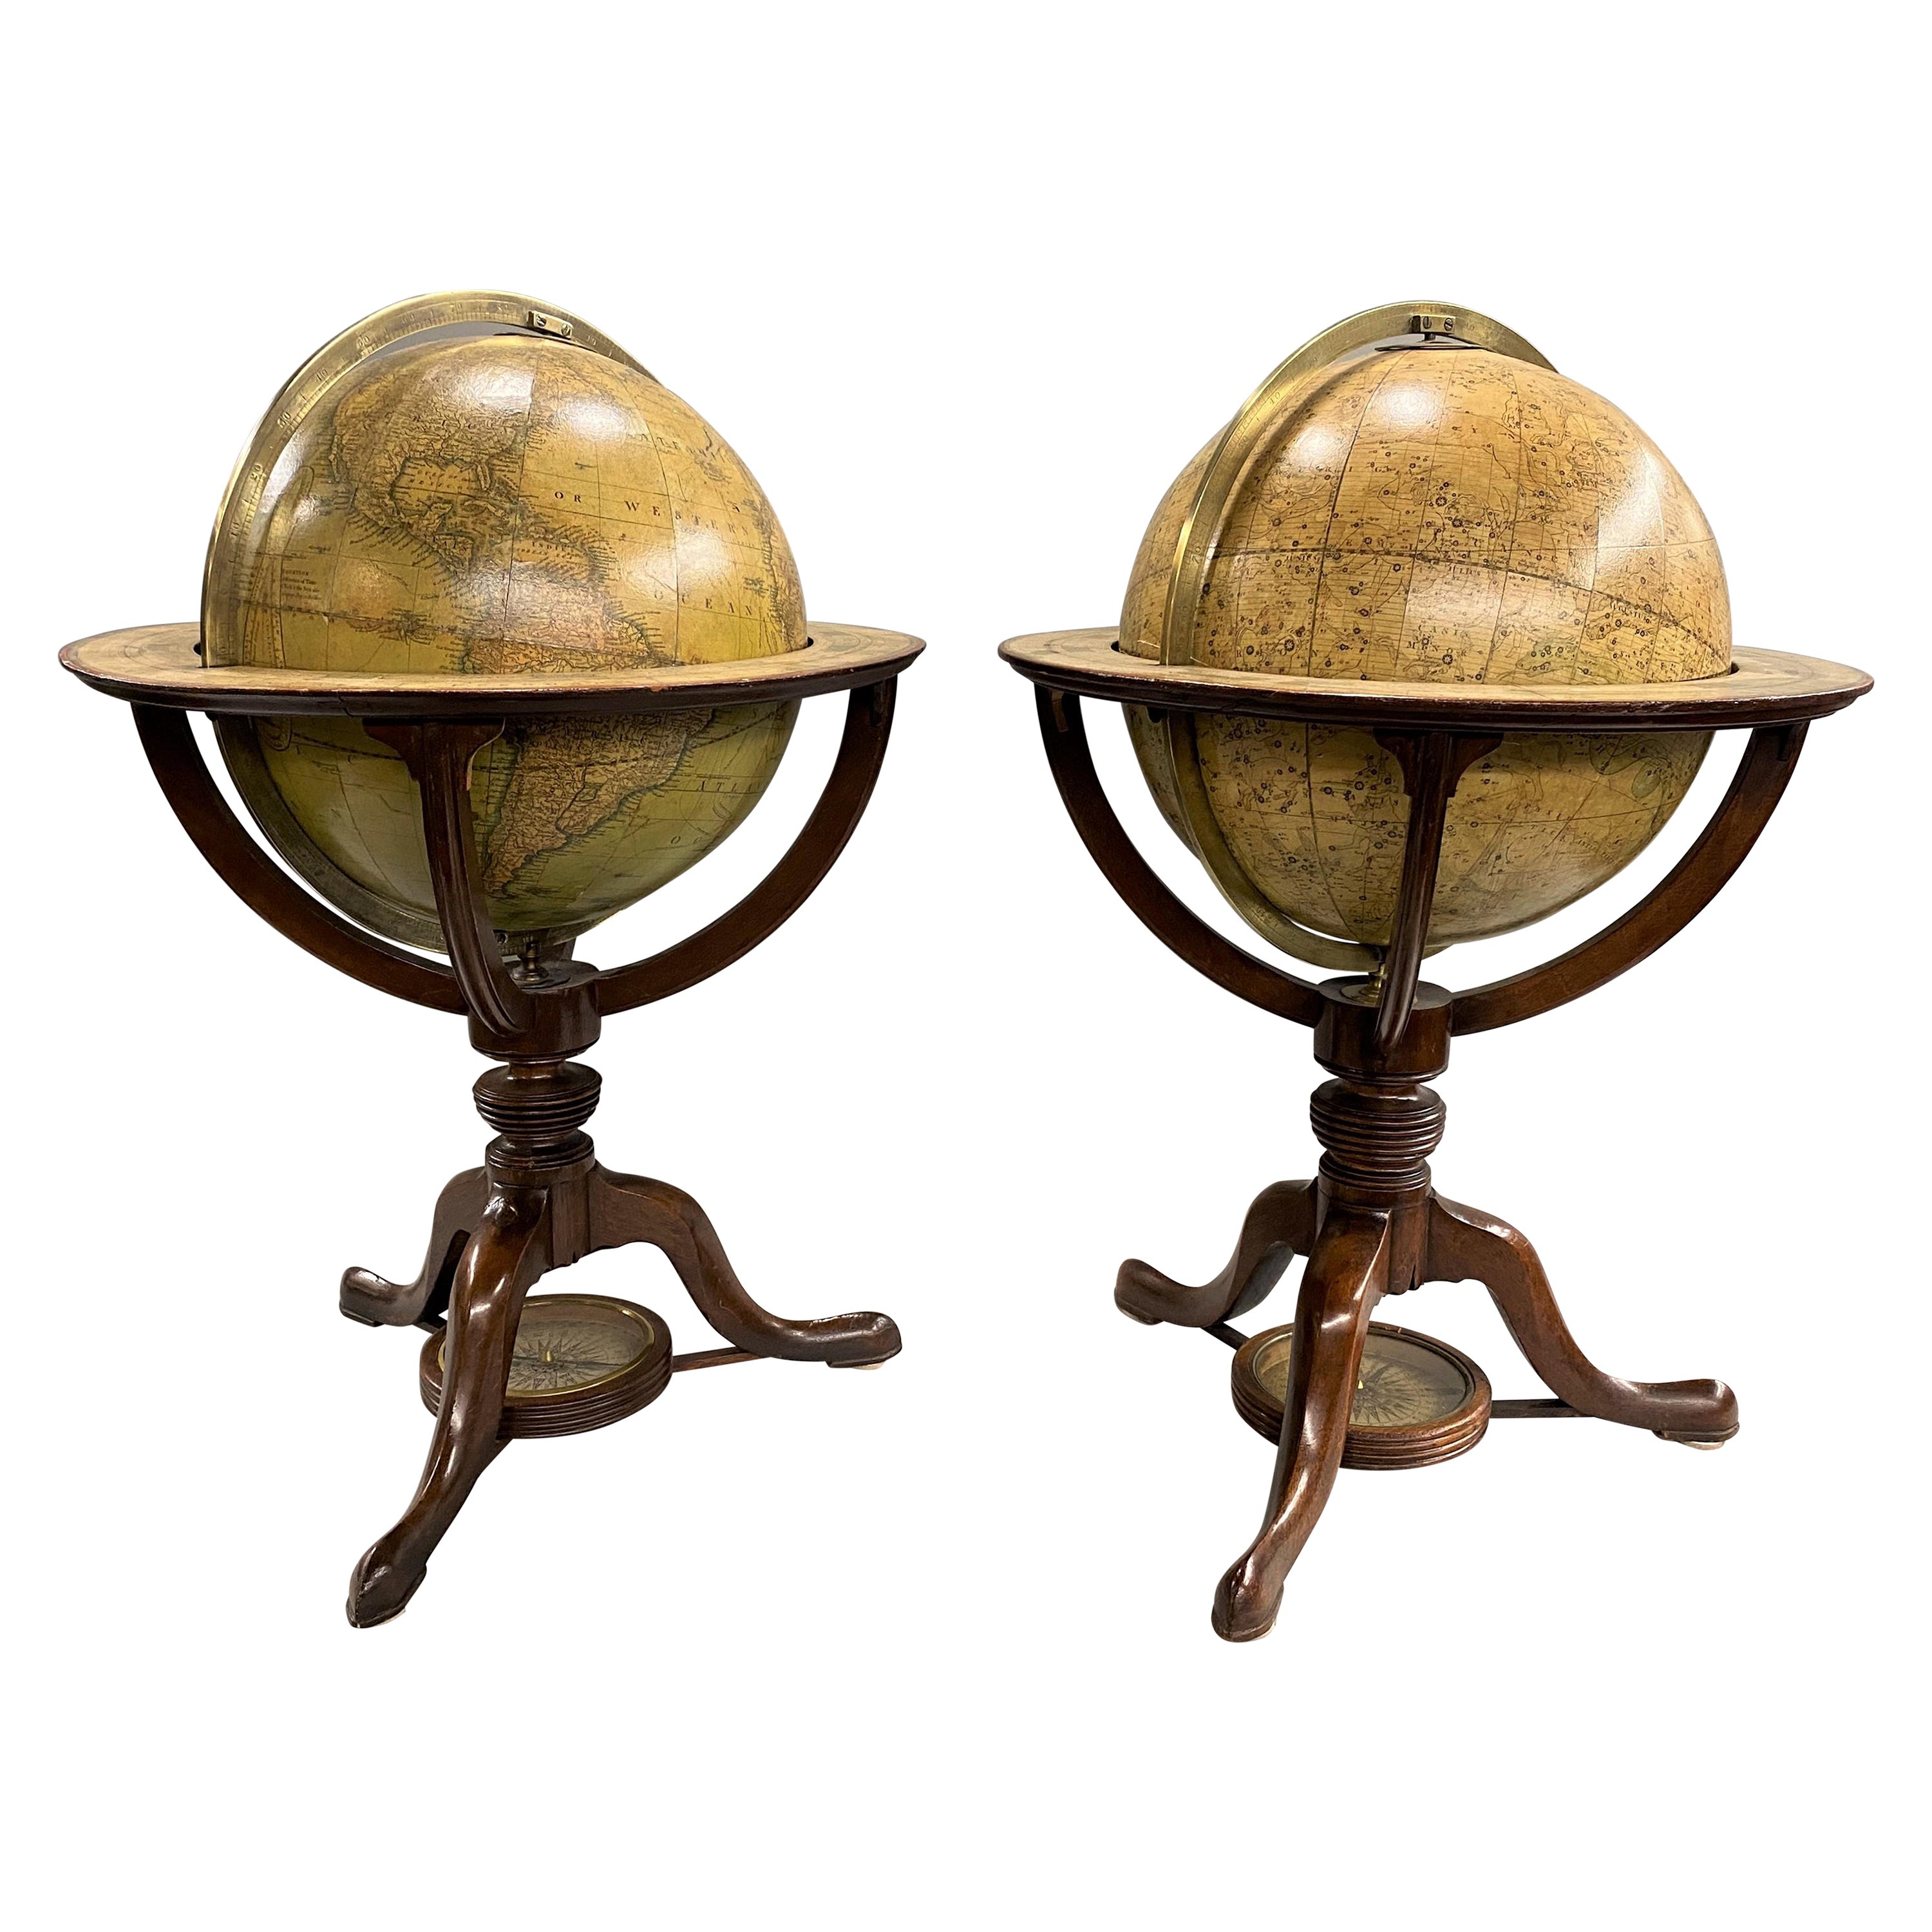 Pair of Early 19th Century English Cary Terrestrial/Celestial Table Model Globes For Sale